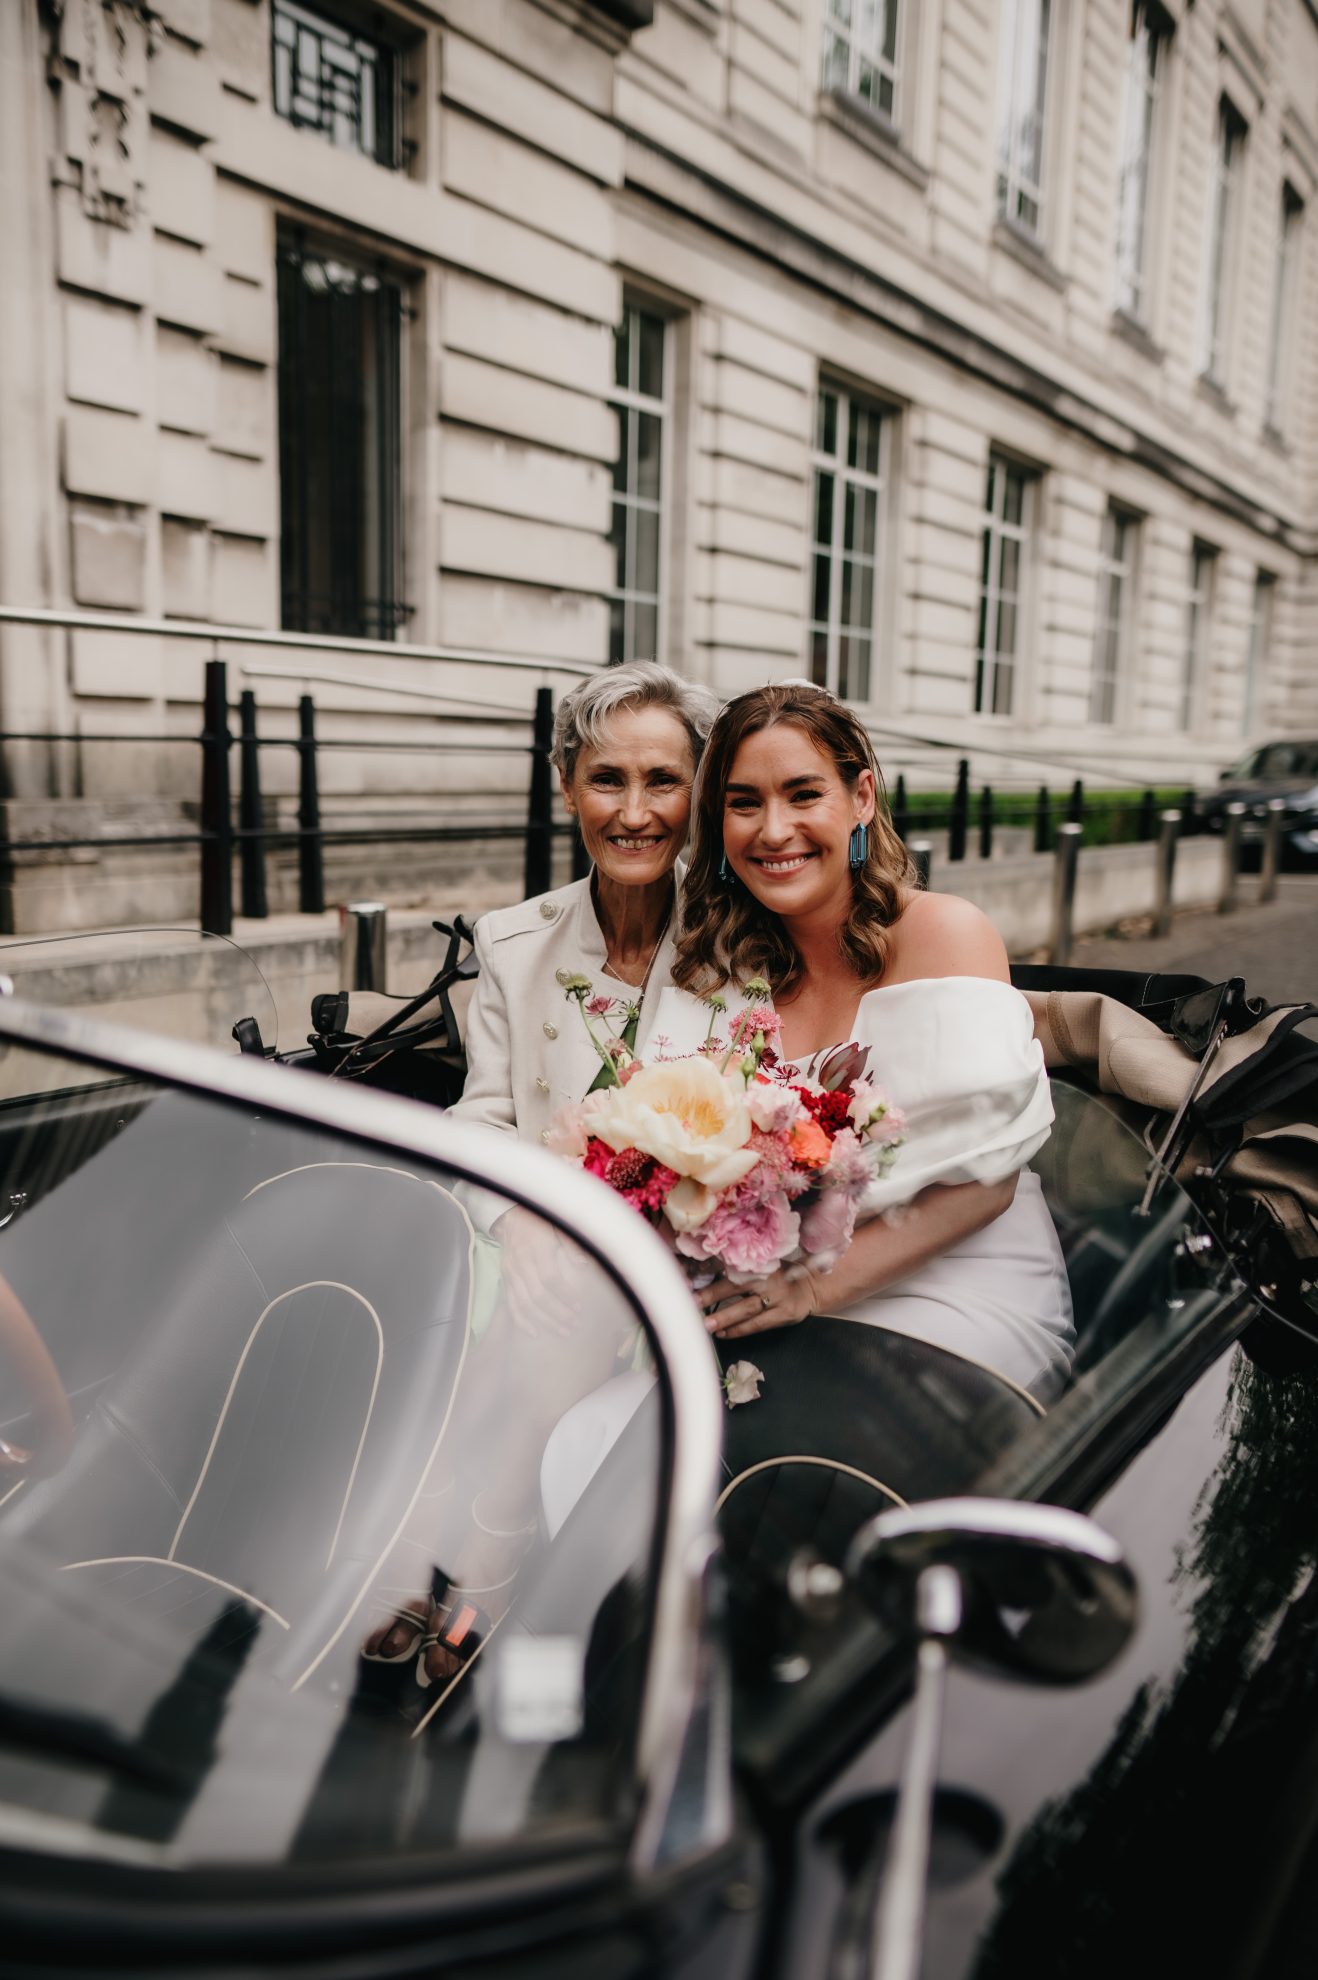 Jael with her mum on her wedding day